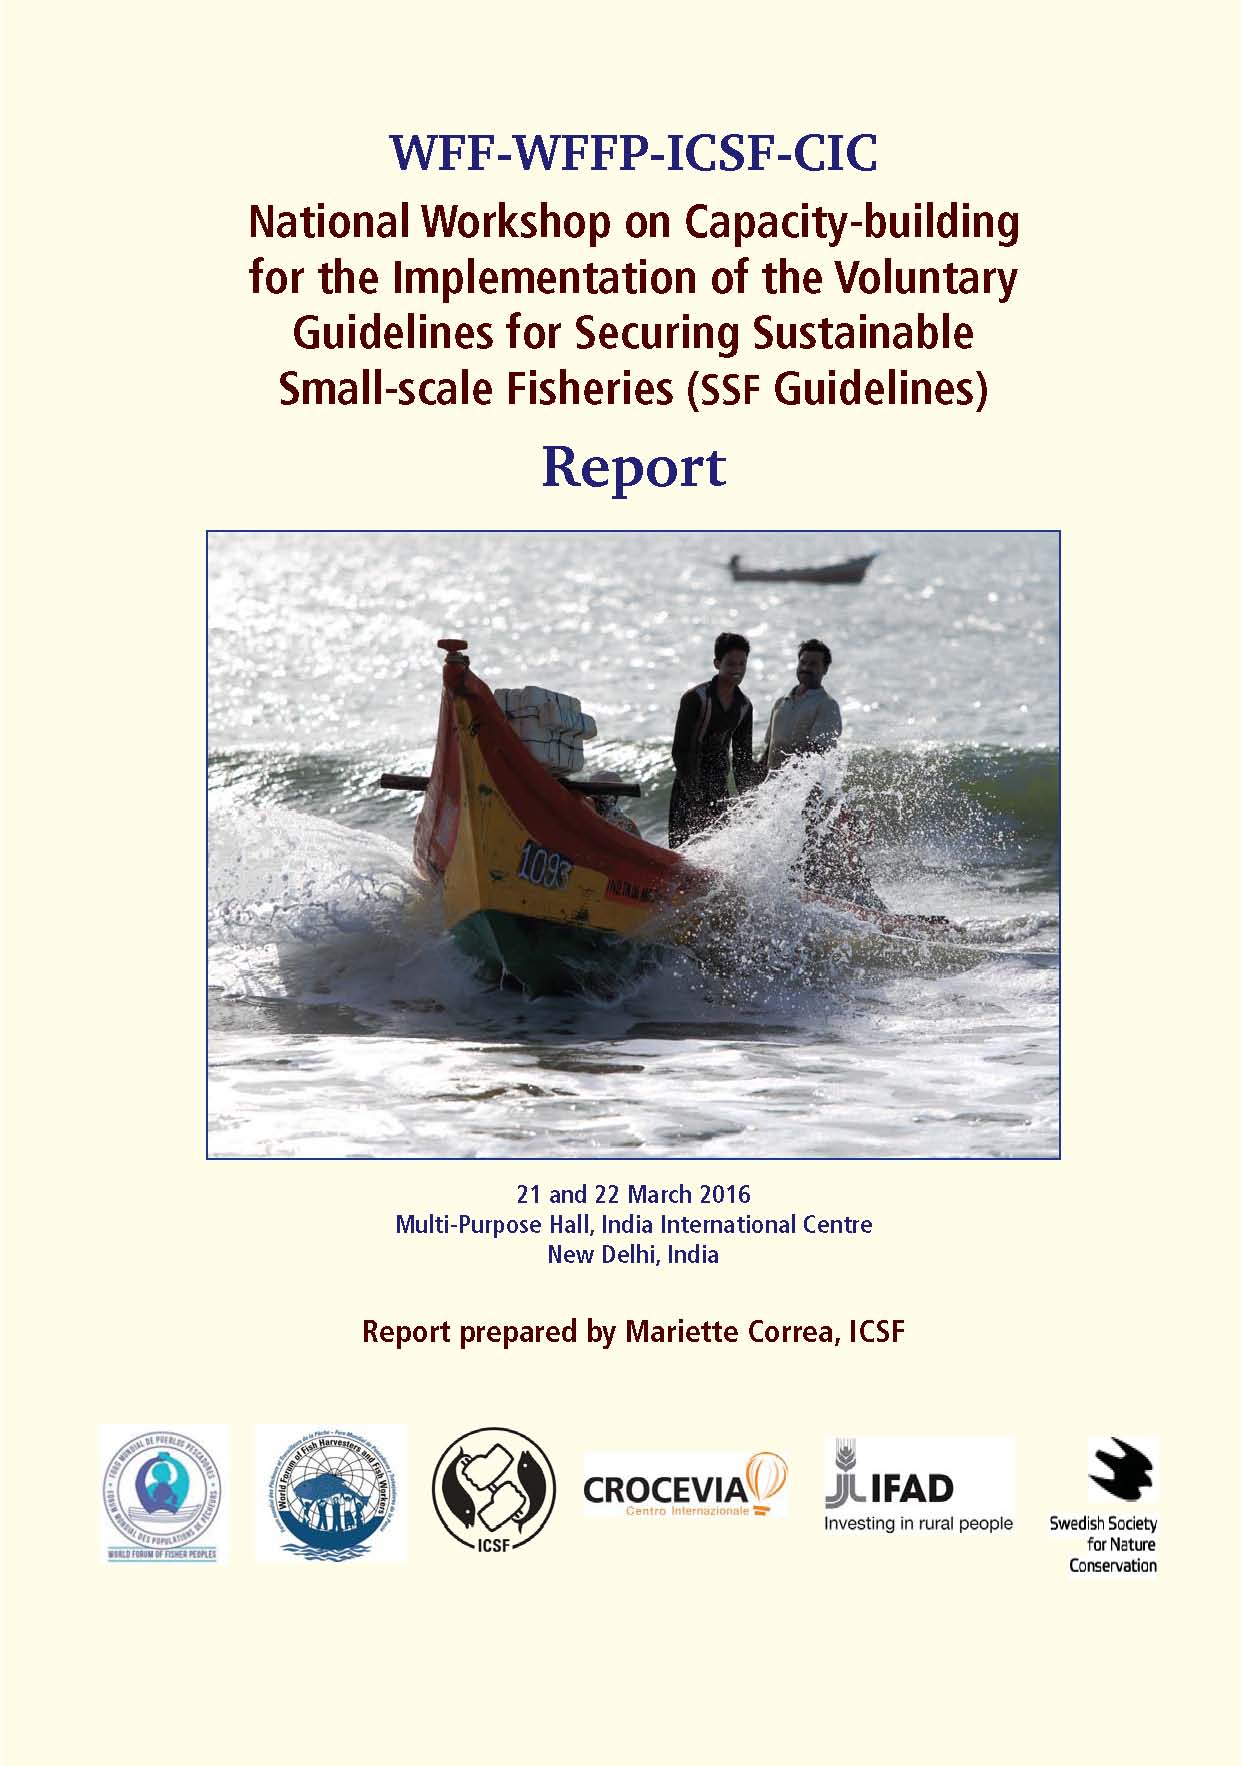 Report of WFF-WFFP-ICSF-CIC National Workshop on Capacity-building for the Implementation of the Voluntary Guidelines for Securing Sustainable Small-scale Fisheries (SSF Guidelines), Multi-Purpose Hall, India International Centre, New Delhi, 21-22 March 2016